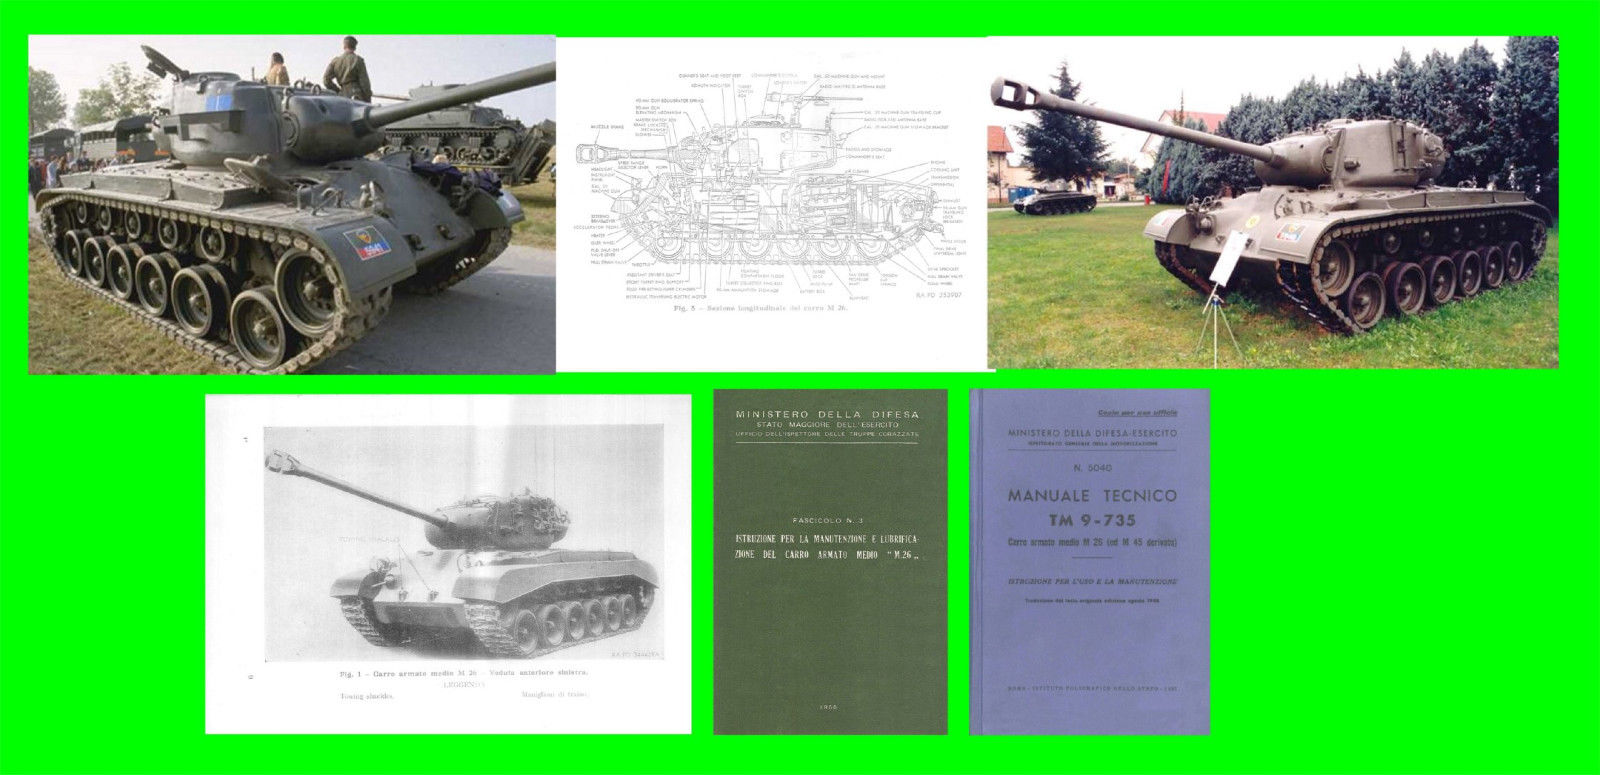 COLLECTION - CARRO ARMATO M26 PERSCHING ARMOURED TANK Manual  - <b>DOWNLOAD</b>